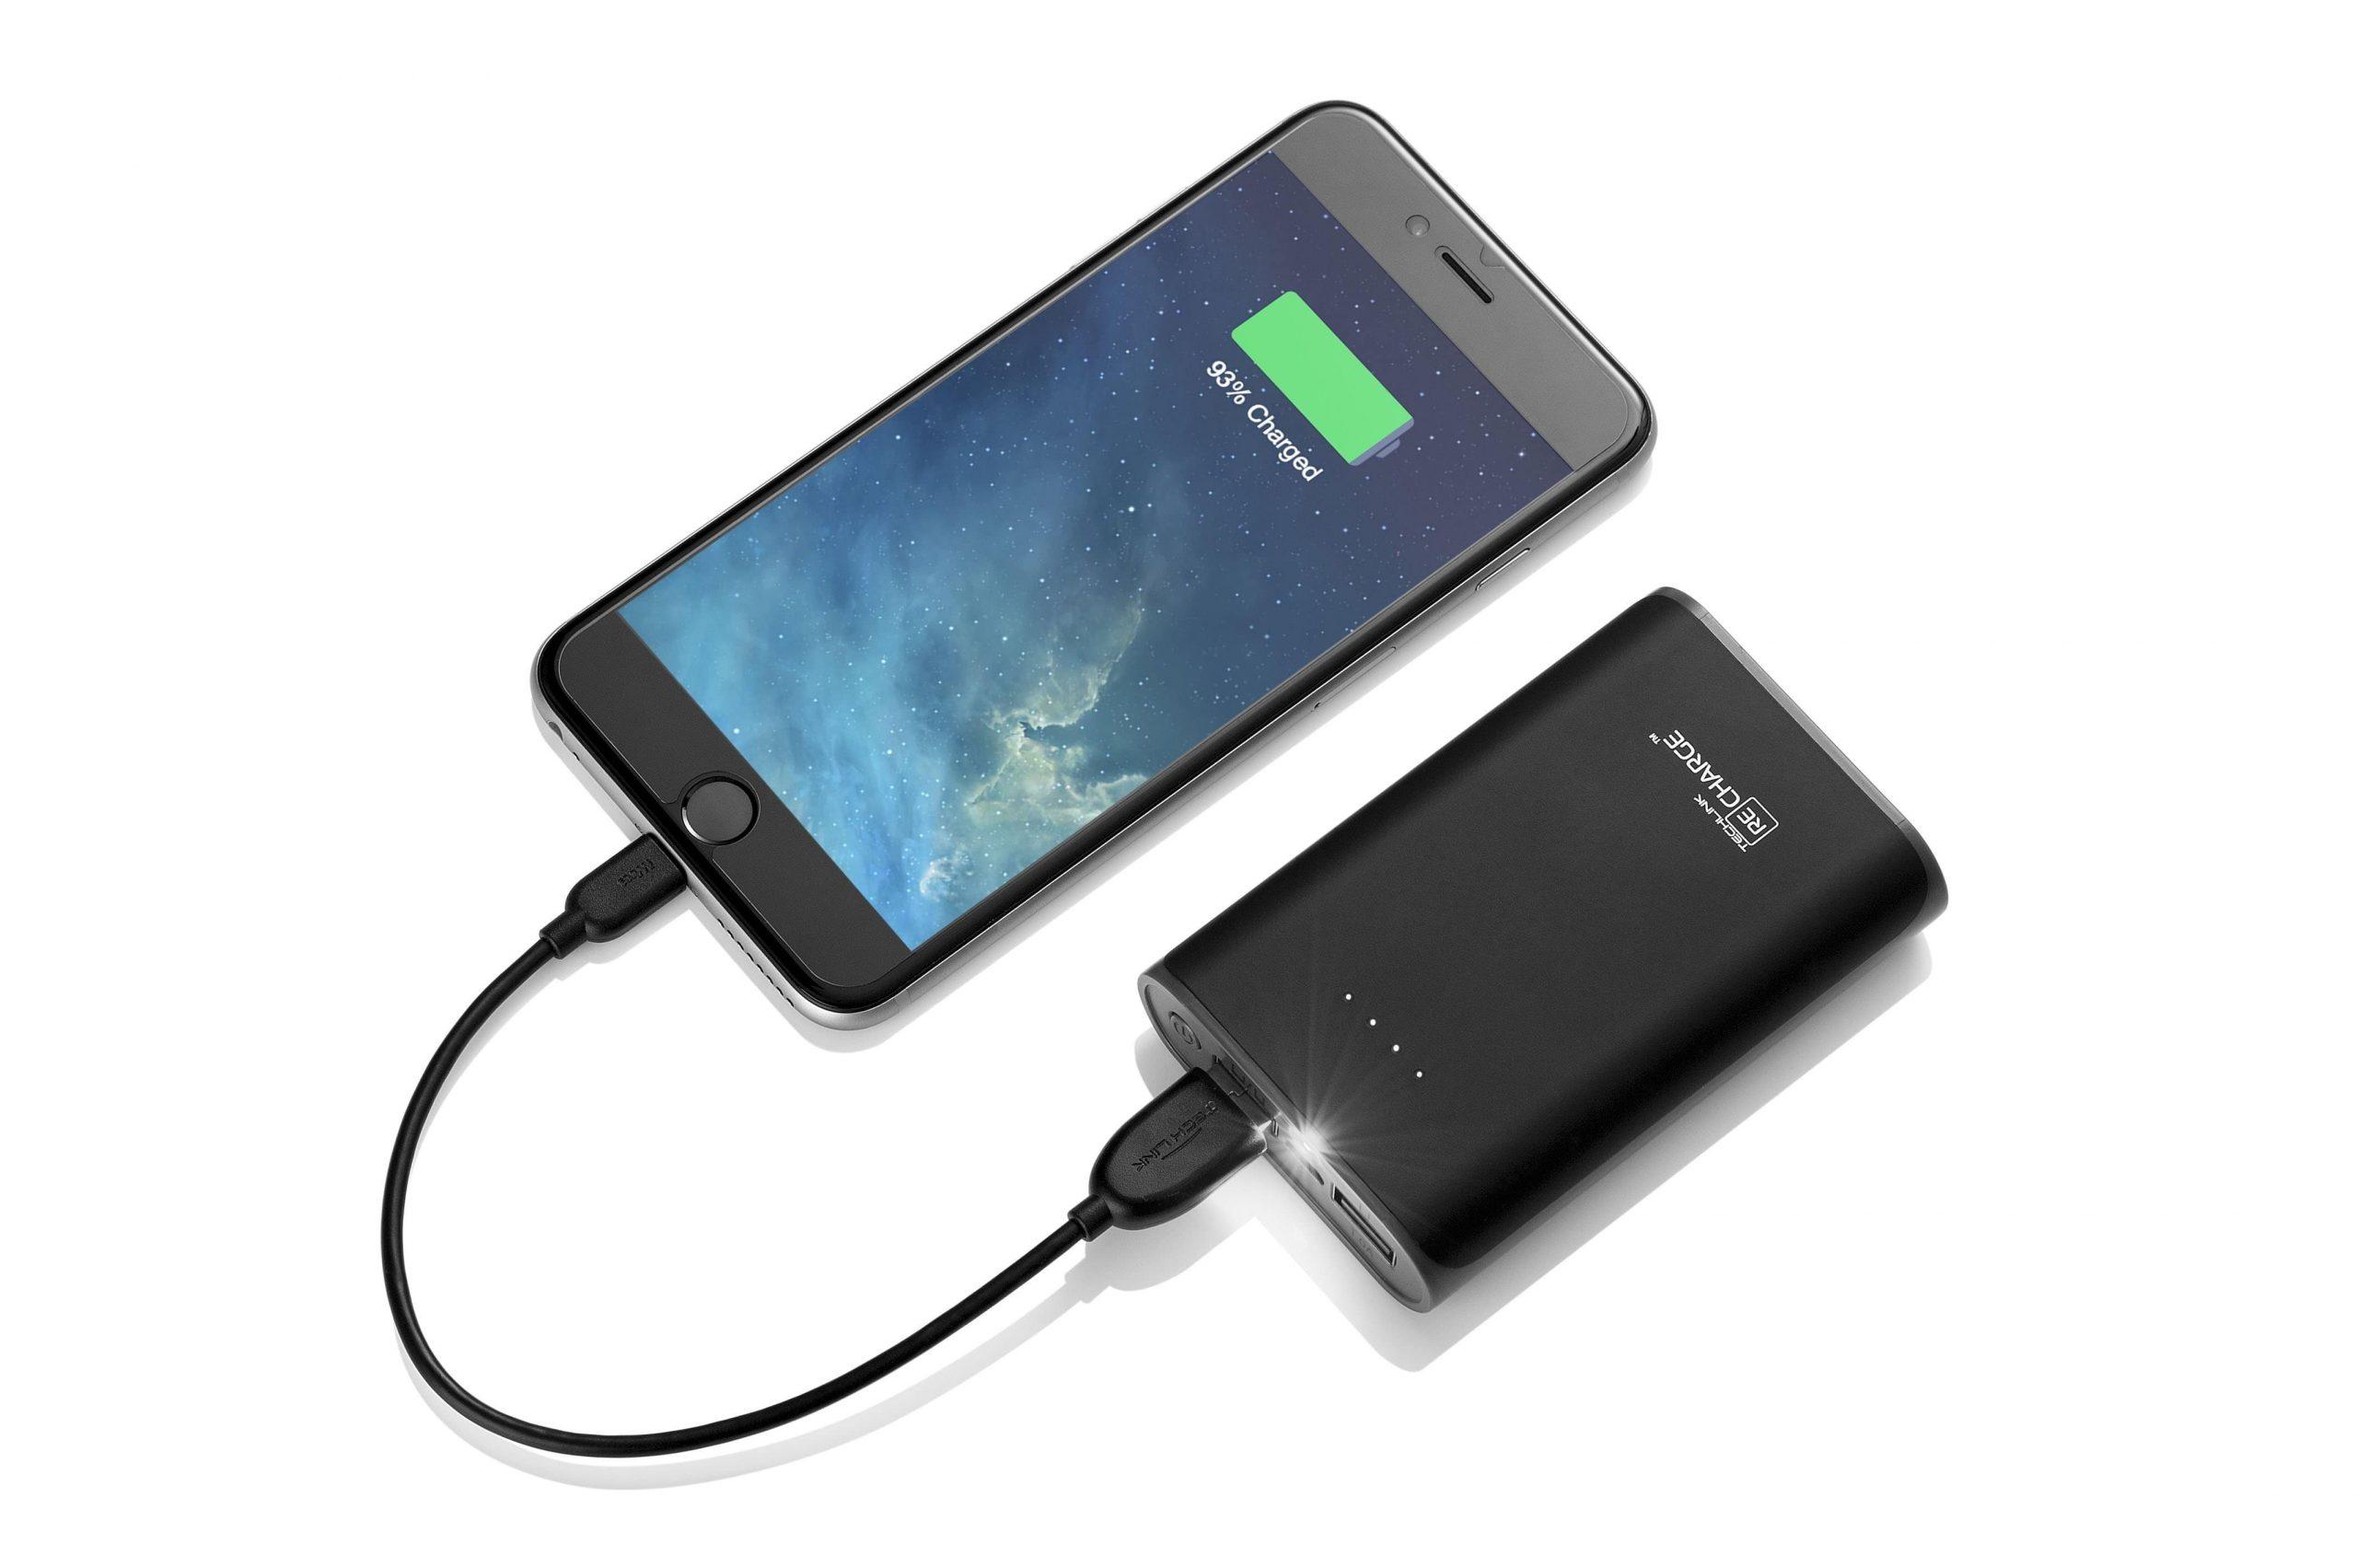 recharge 7800 2 4a powerbank dual usb with torch black grey